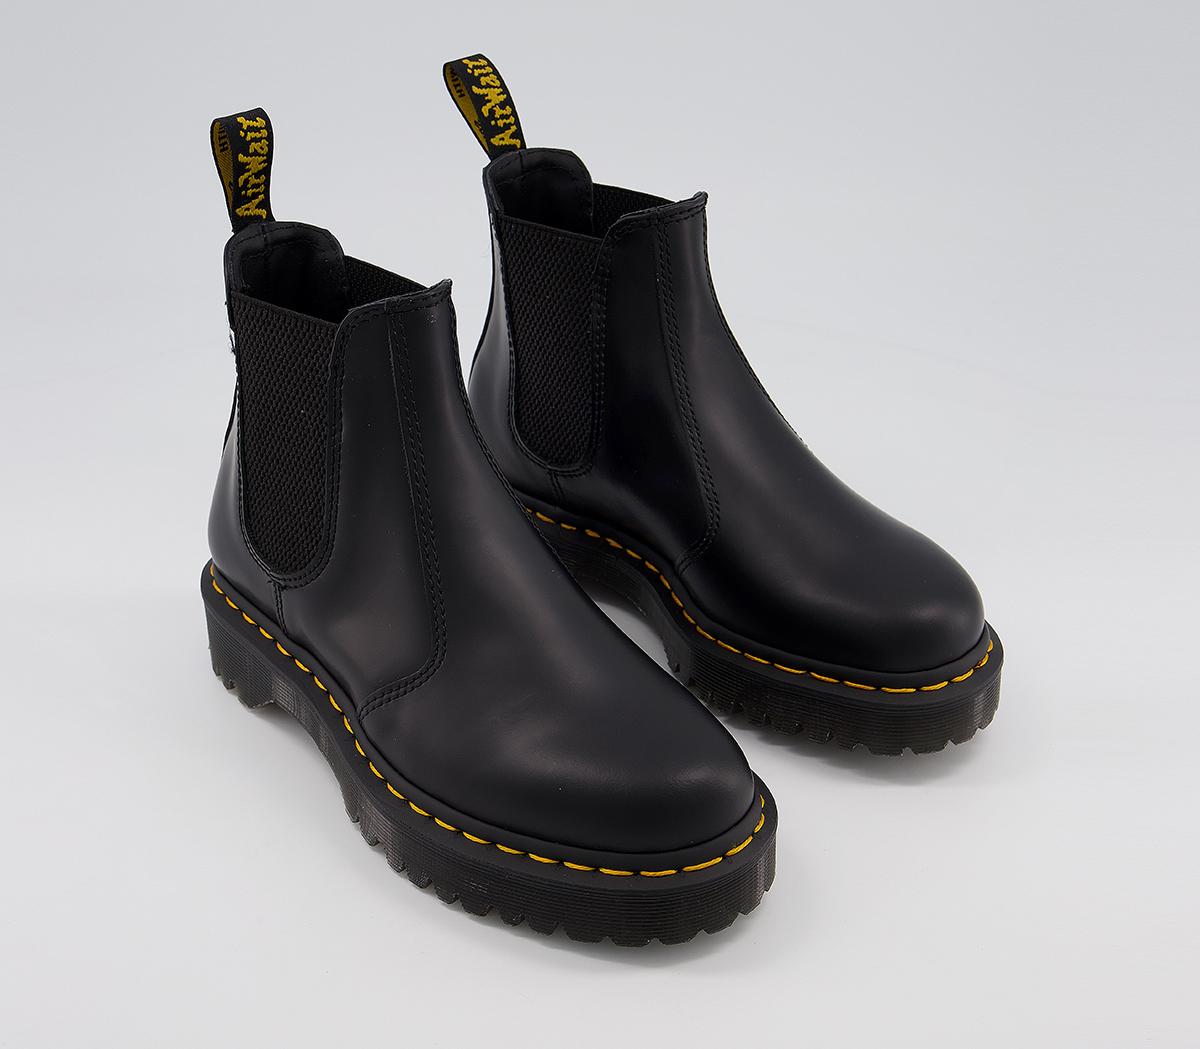 Dr. Martens 2976 Bex Chelsea Boots Black Smooth - Ankle Boots